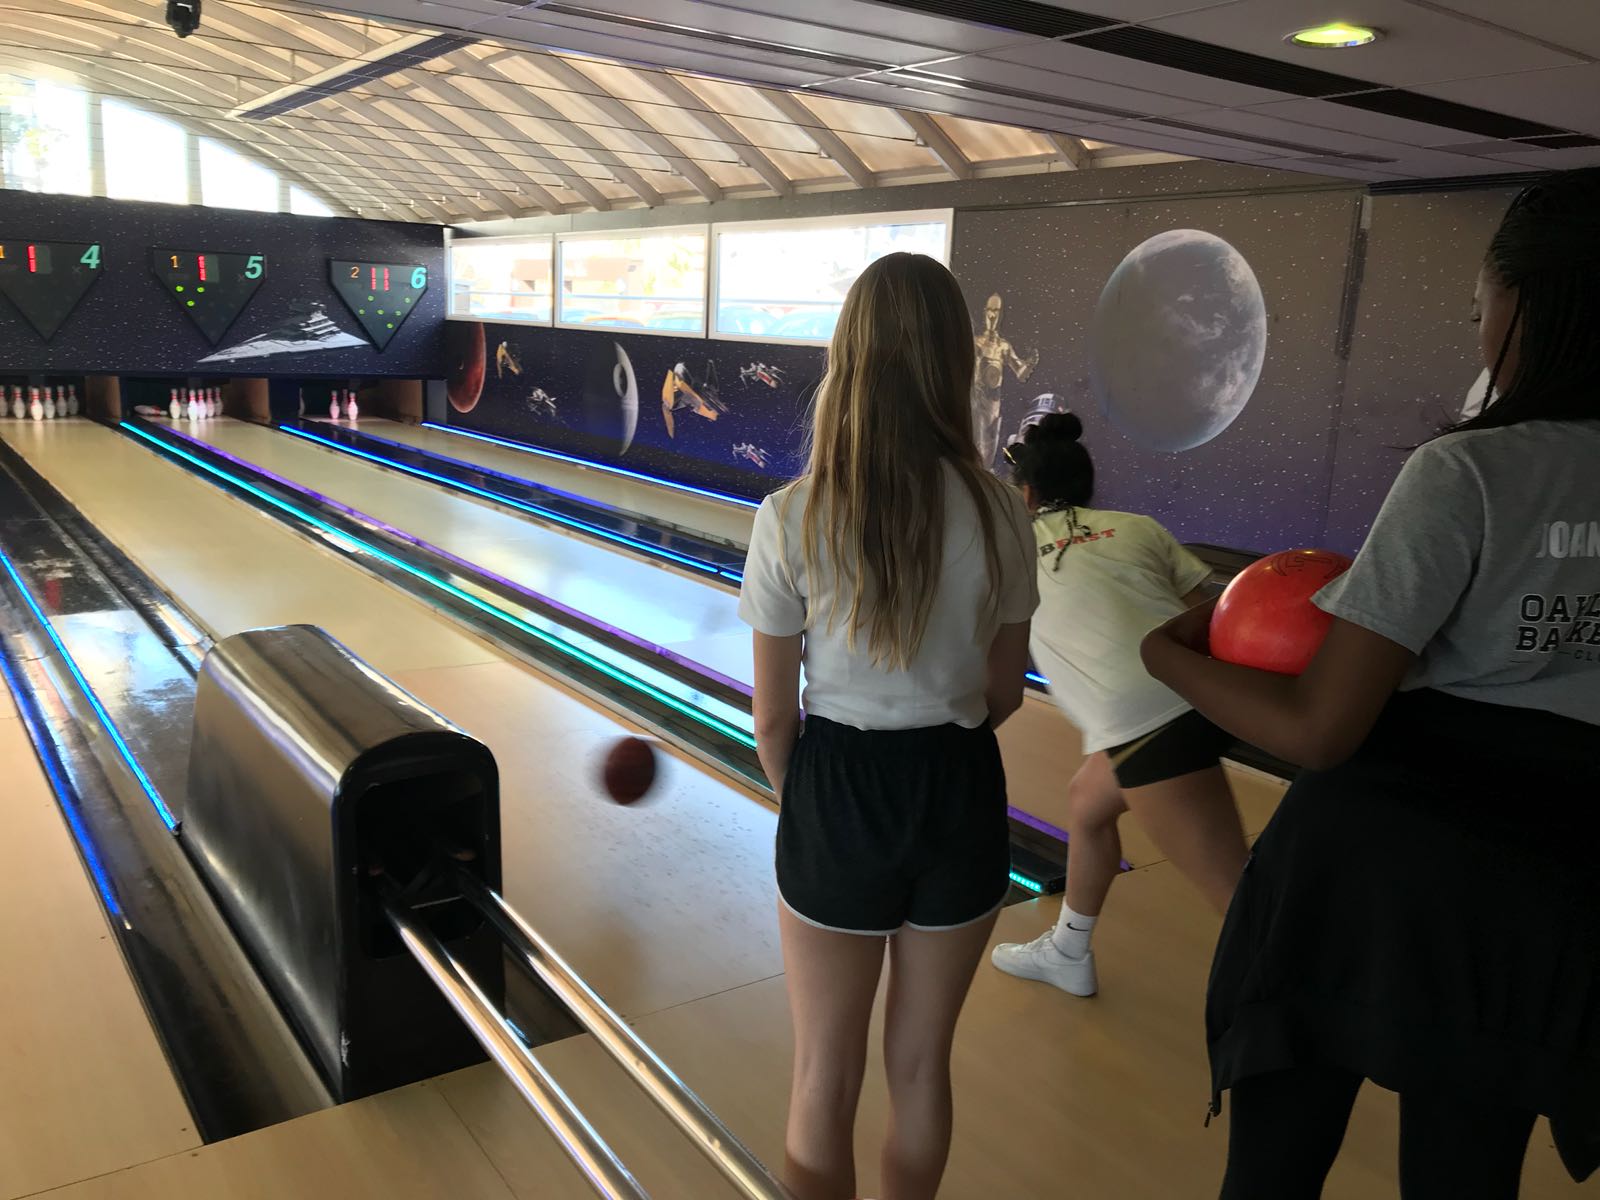 Evening bowling and mini-golf